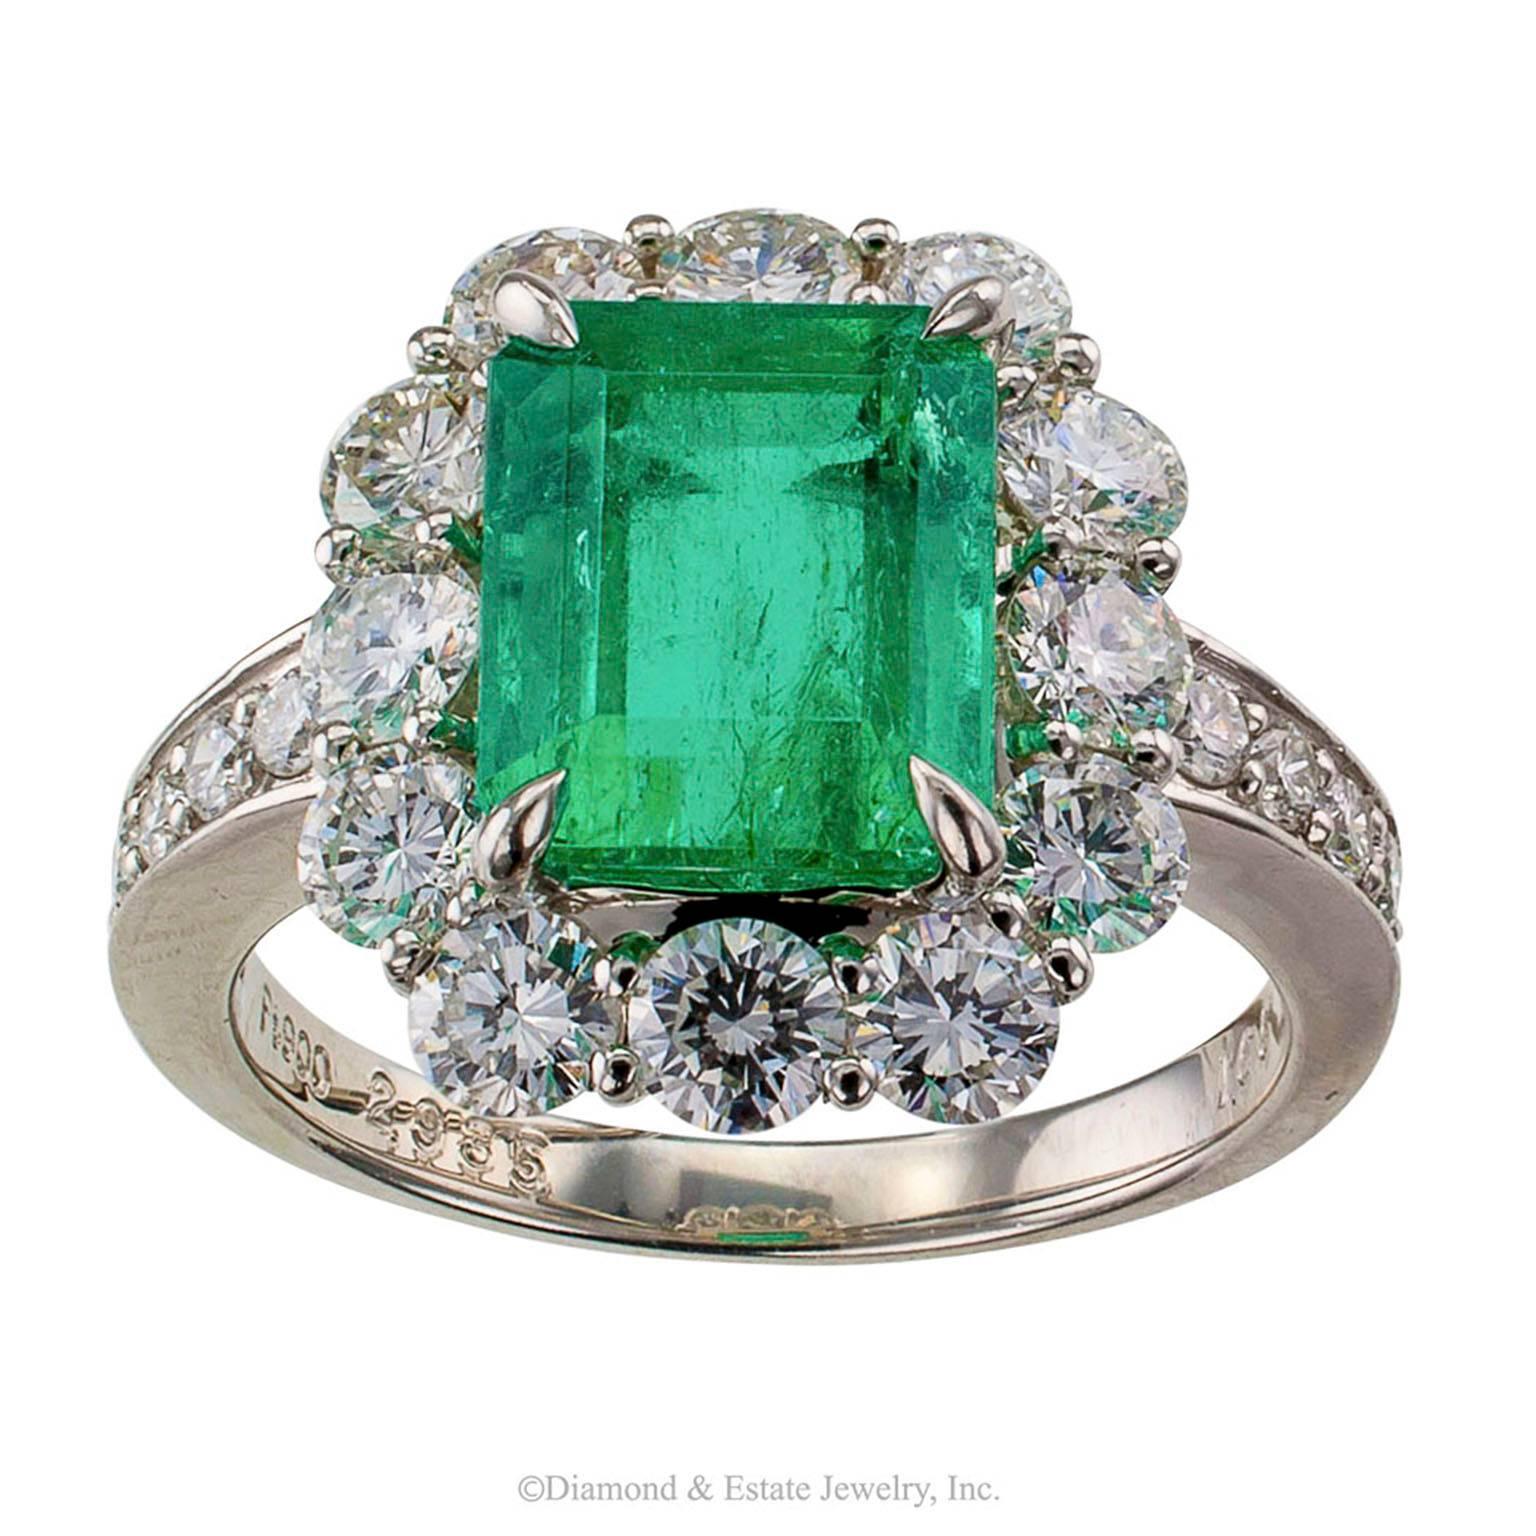 Emerald-cut 2.93 Carats Colombian Emerald Diamond Platinum Ring

Emerald-cut Colombian emerald and diamond ring mounted in platinum circa 1990.  The lively emerald-cut emerald weighing 2.93 carats, within a border of round brilliant-cut diamonds, to